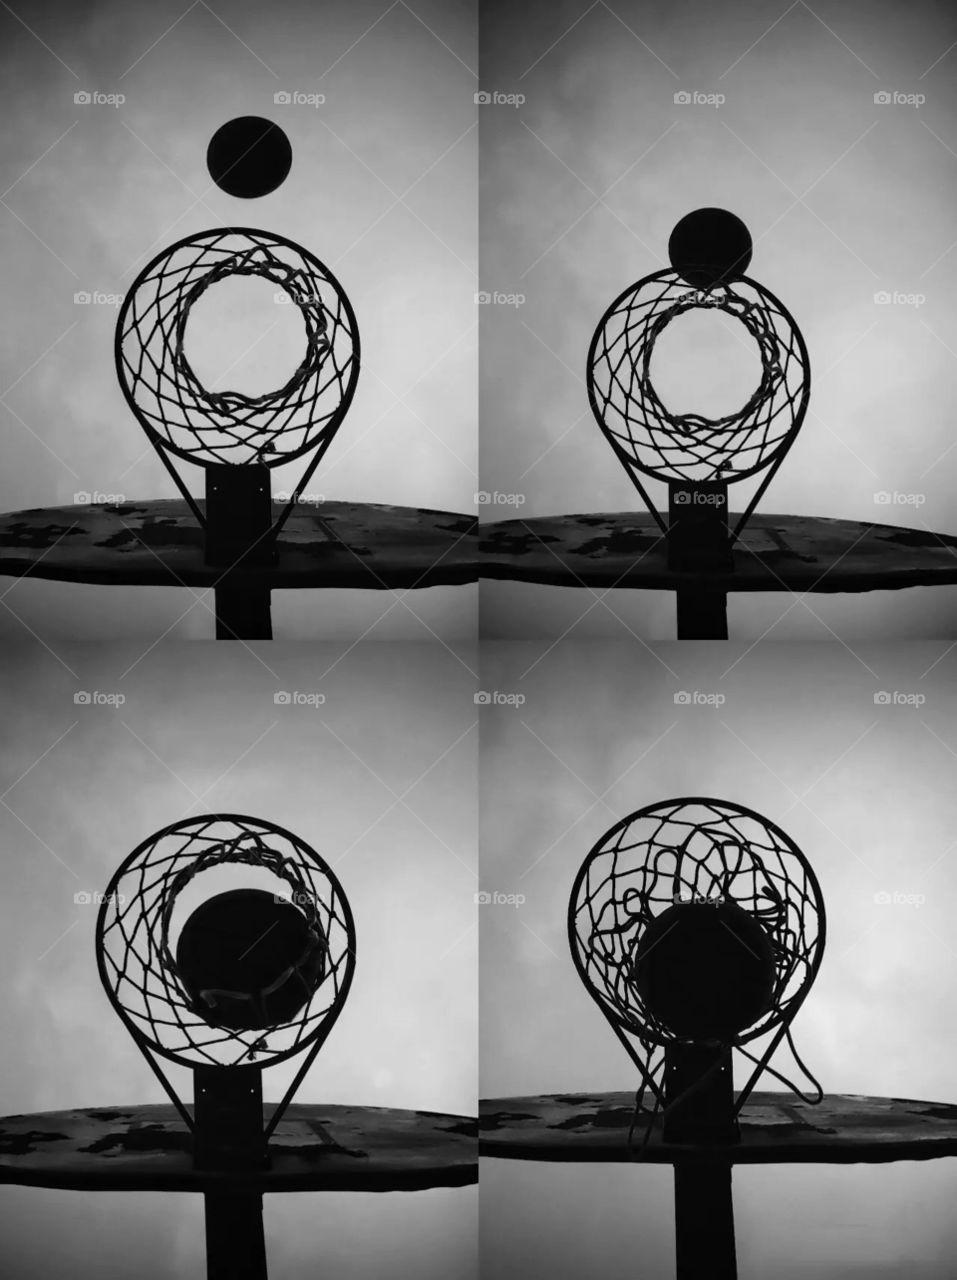 Sequence of a basket 